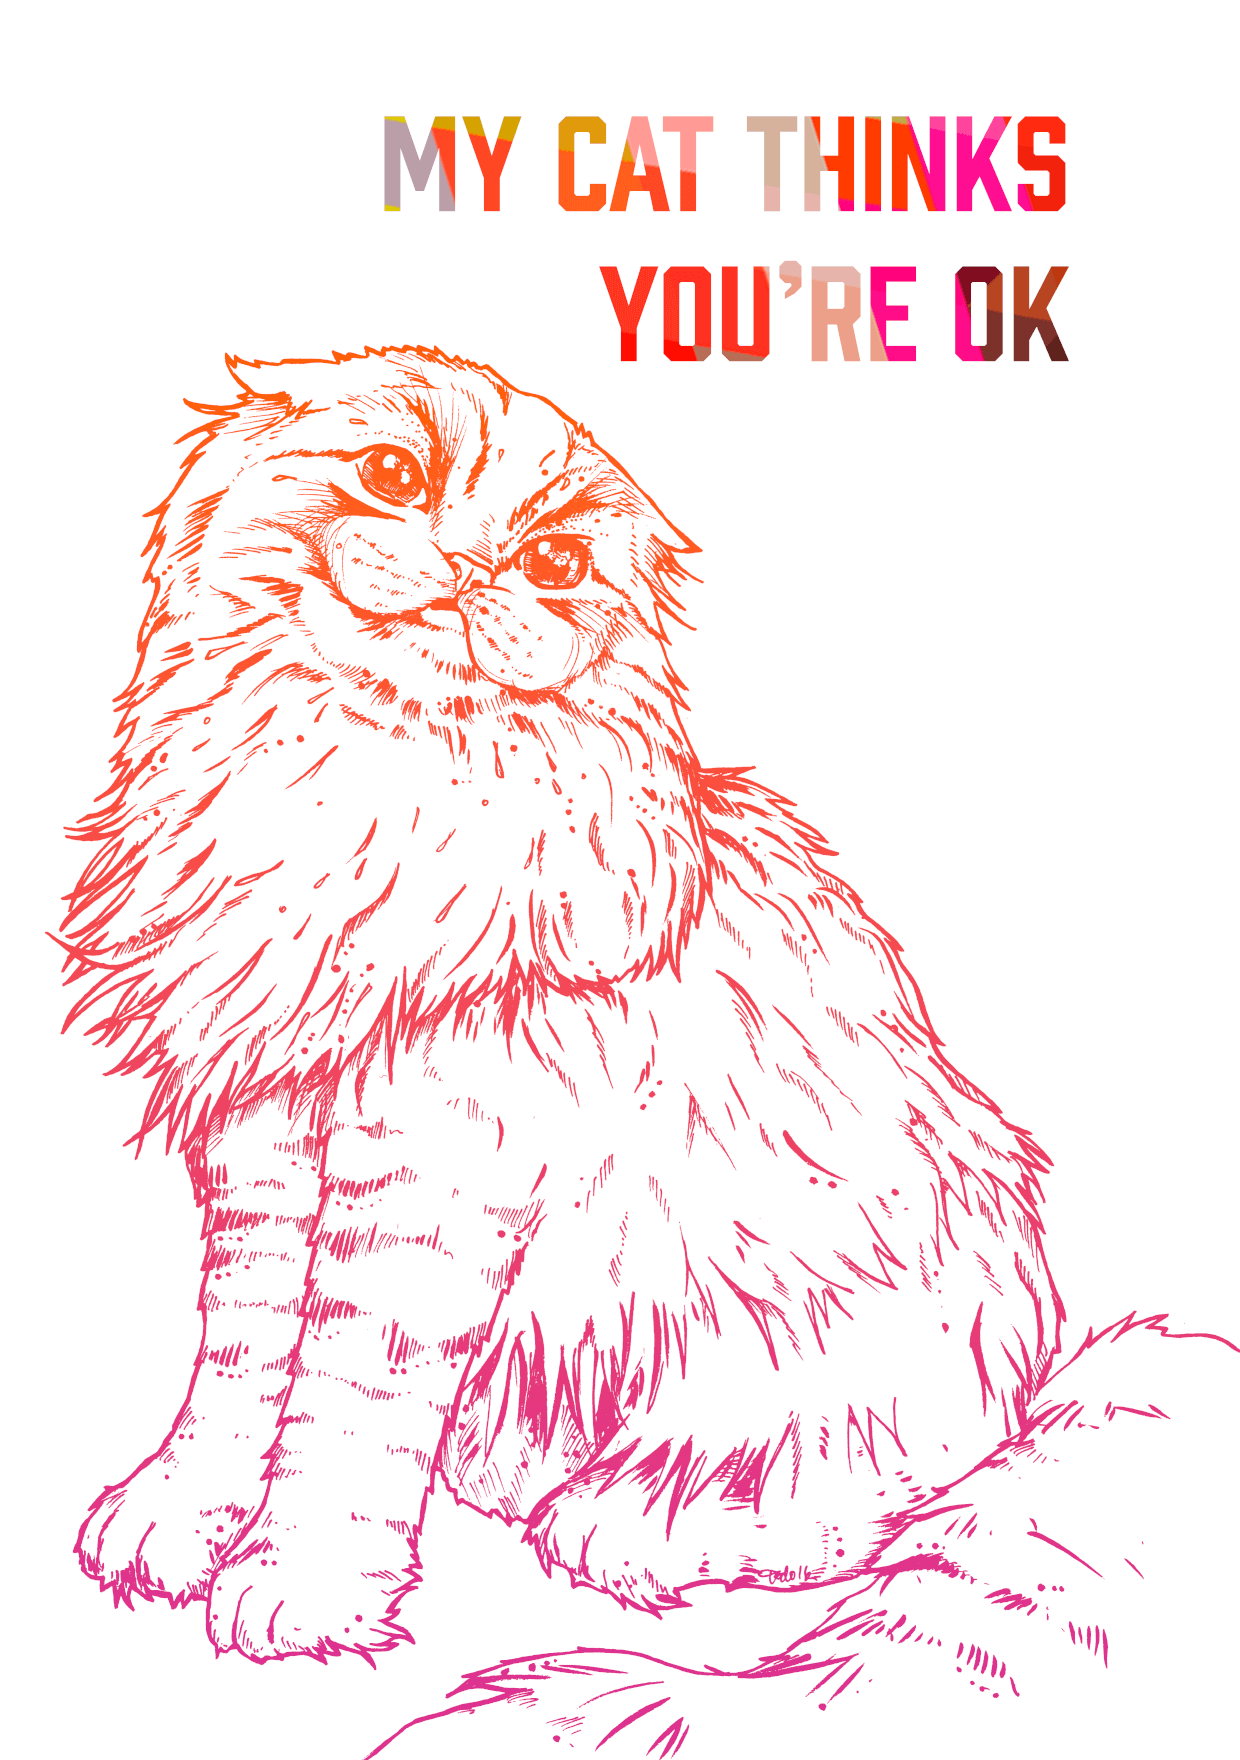 My Cat Thinks You're Ok Greeting Card